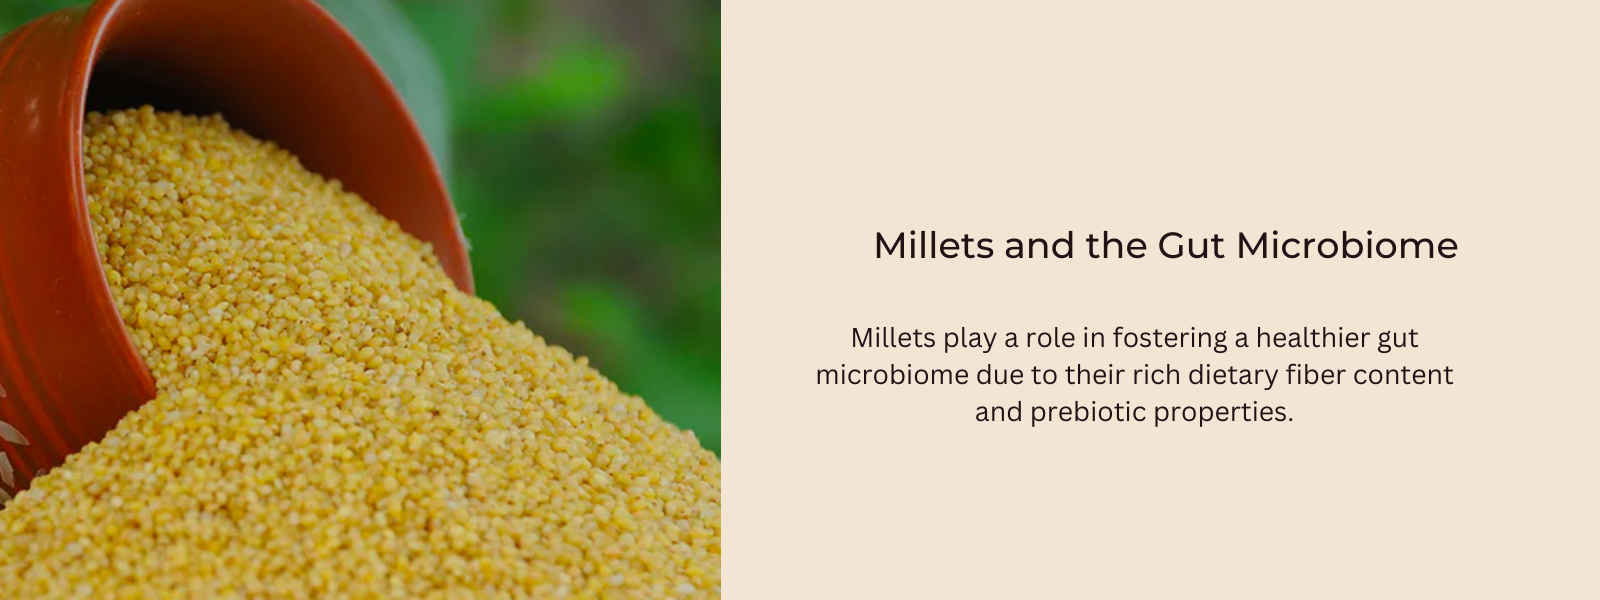 Millets and the Gut Microbiome: A Healthier Digestive System